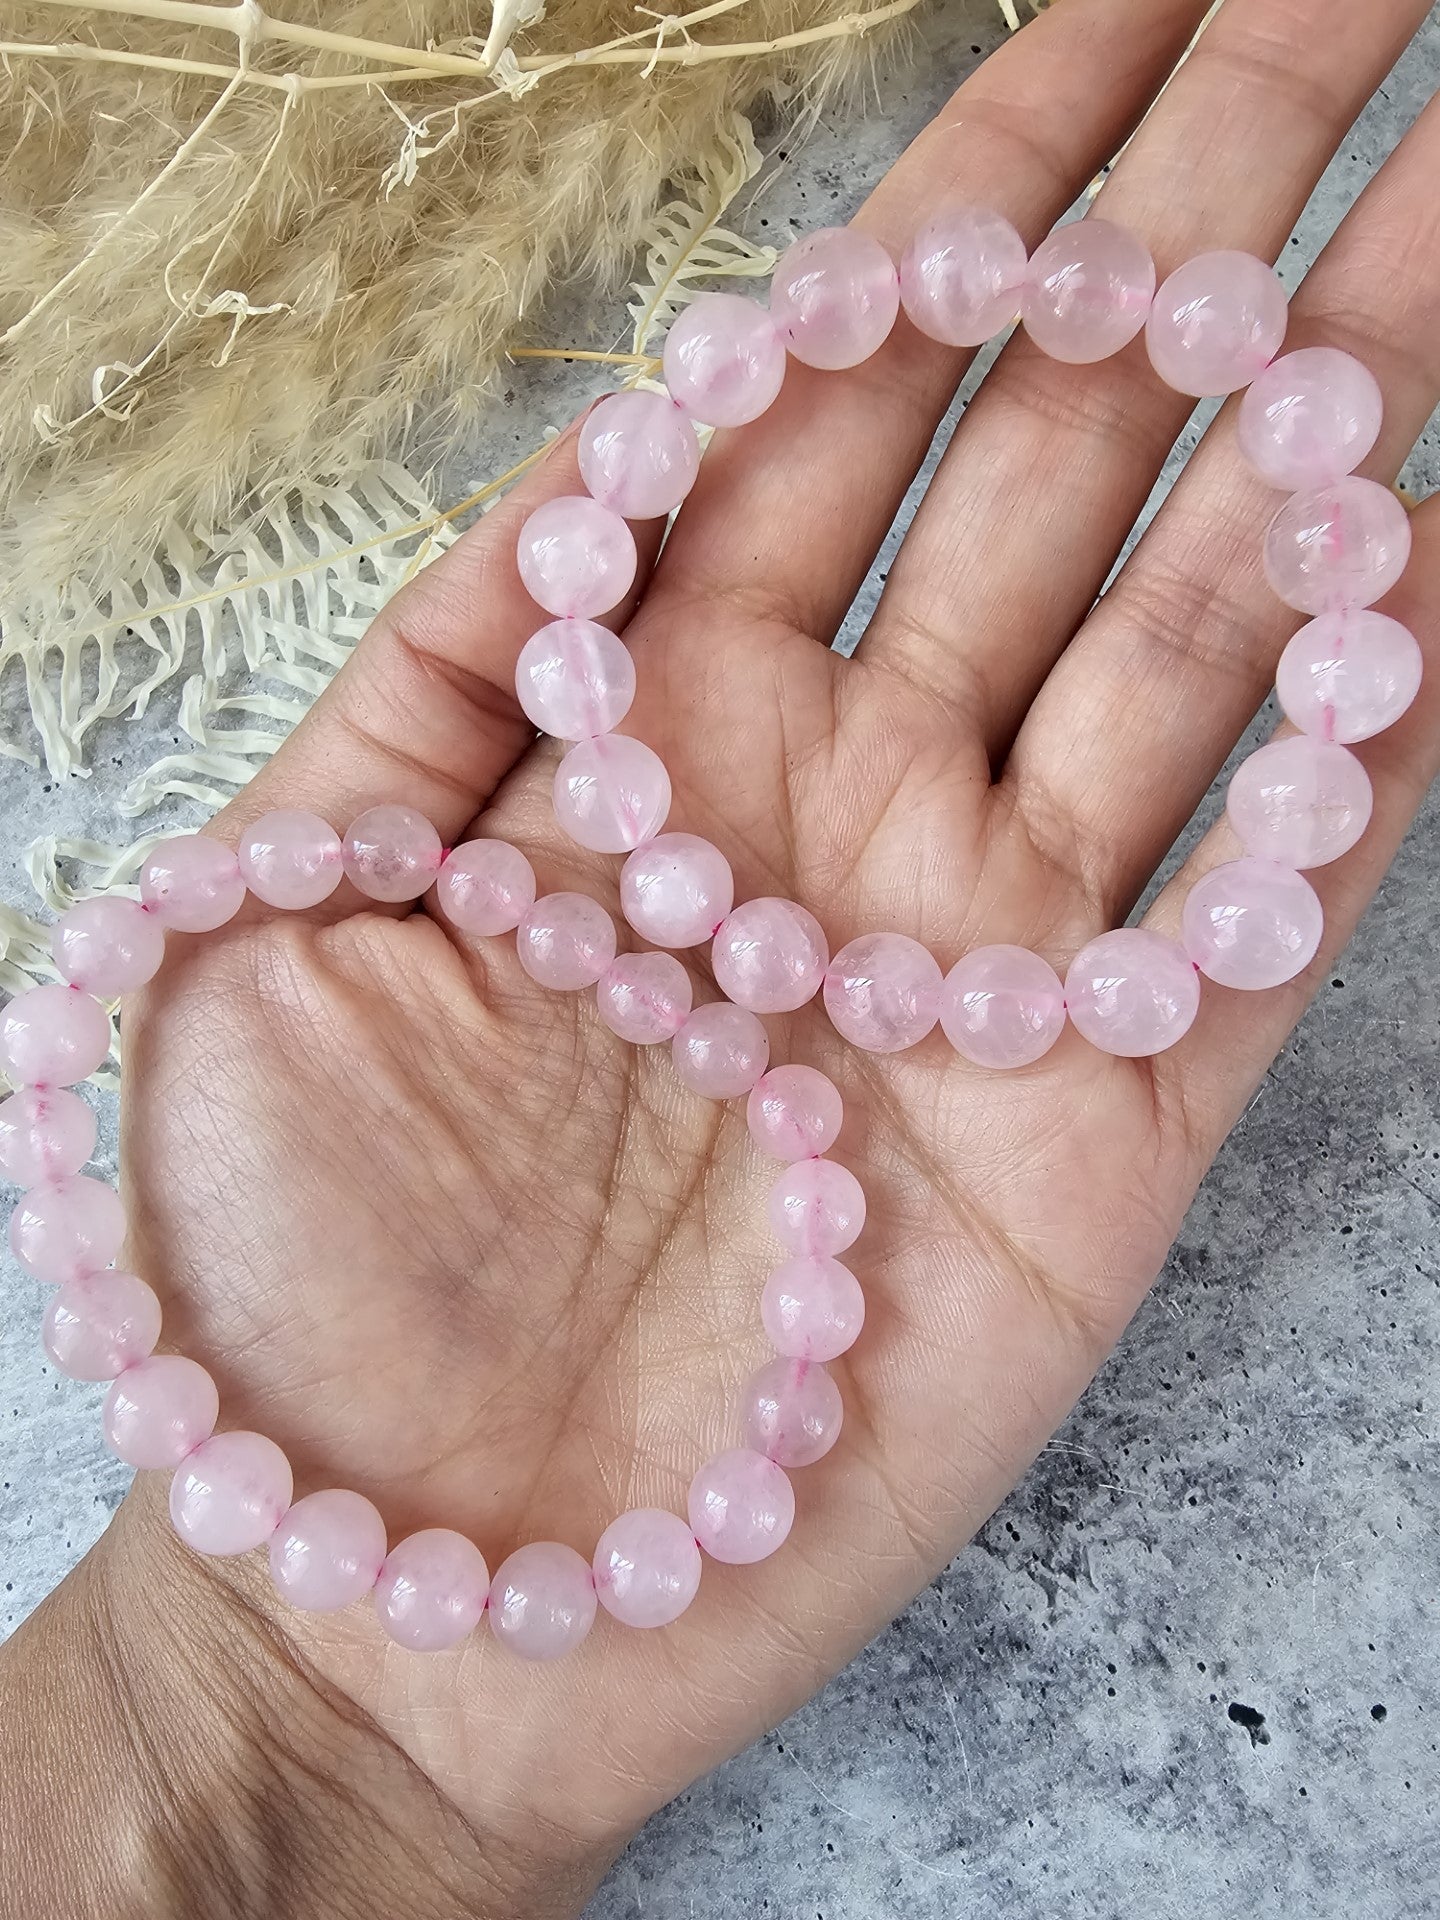 Rose quartz Round Bead Stretch Bracelet - Two Beads Sizes Available - Jewelry  from CirceBoutique